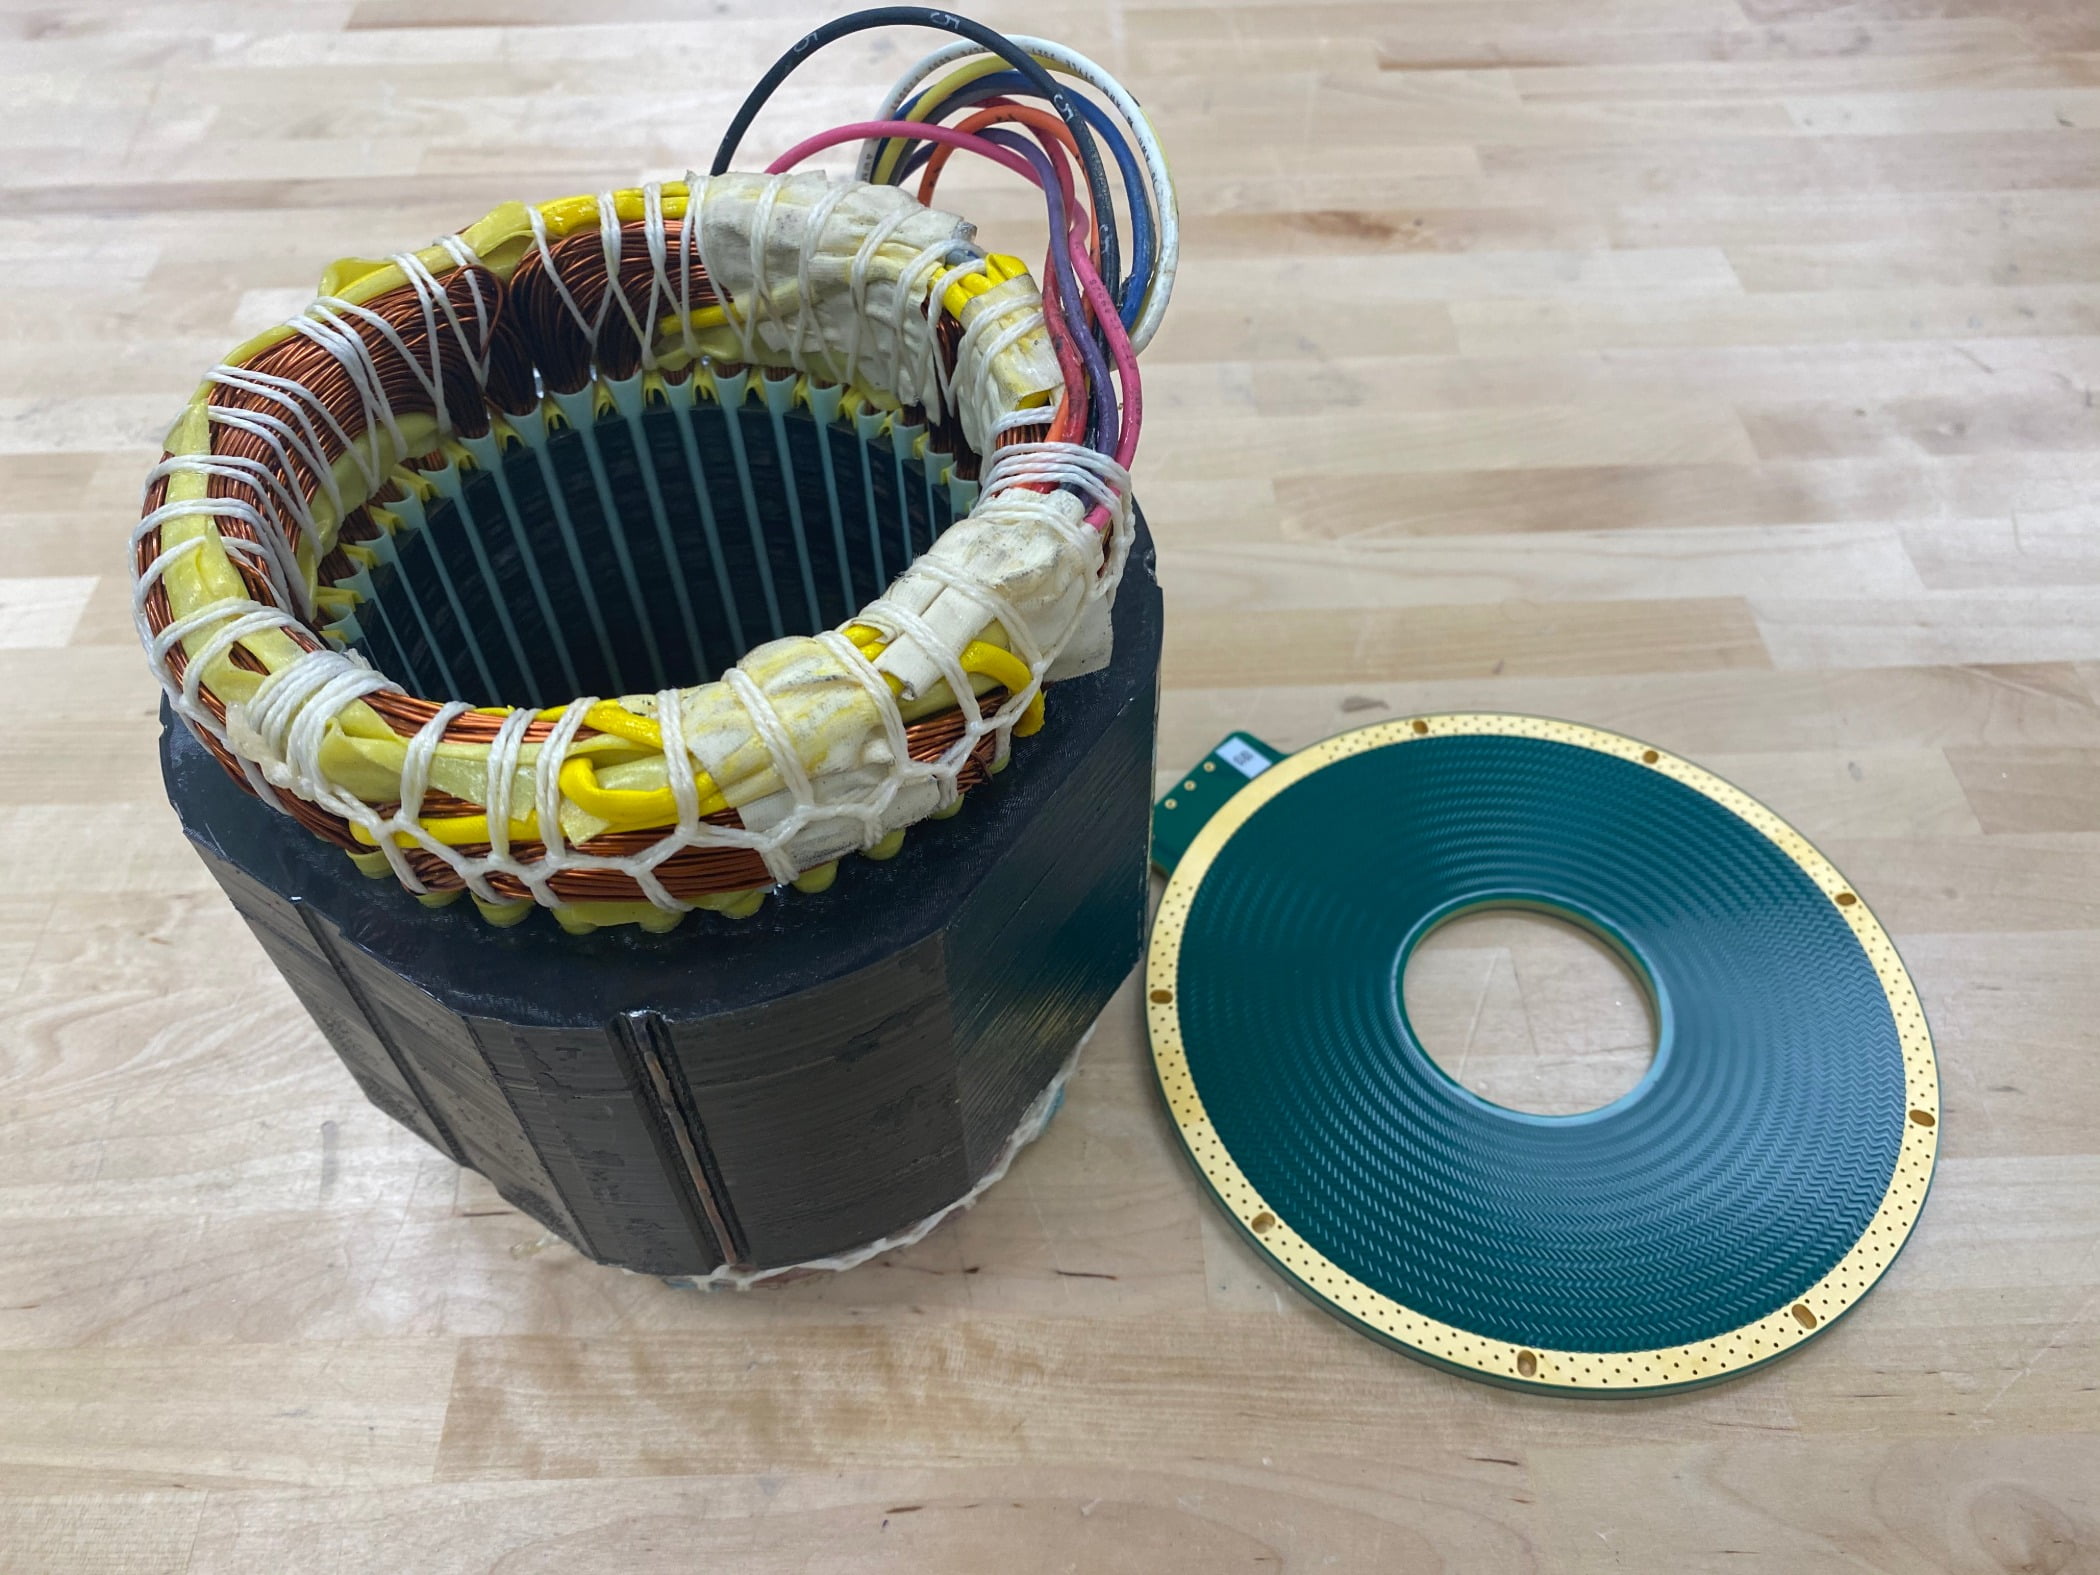 This silicon-based printed circuit board stator right is much easier to mass-produce than a traditional heavy iron core stator left. 